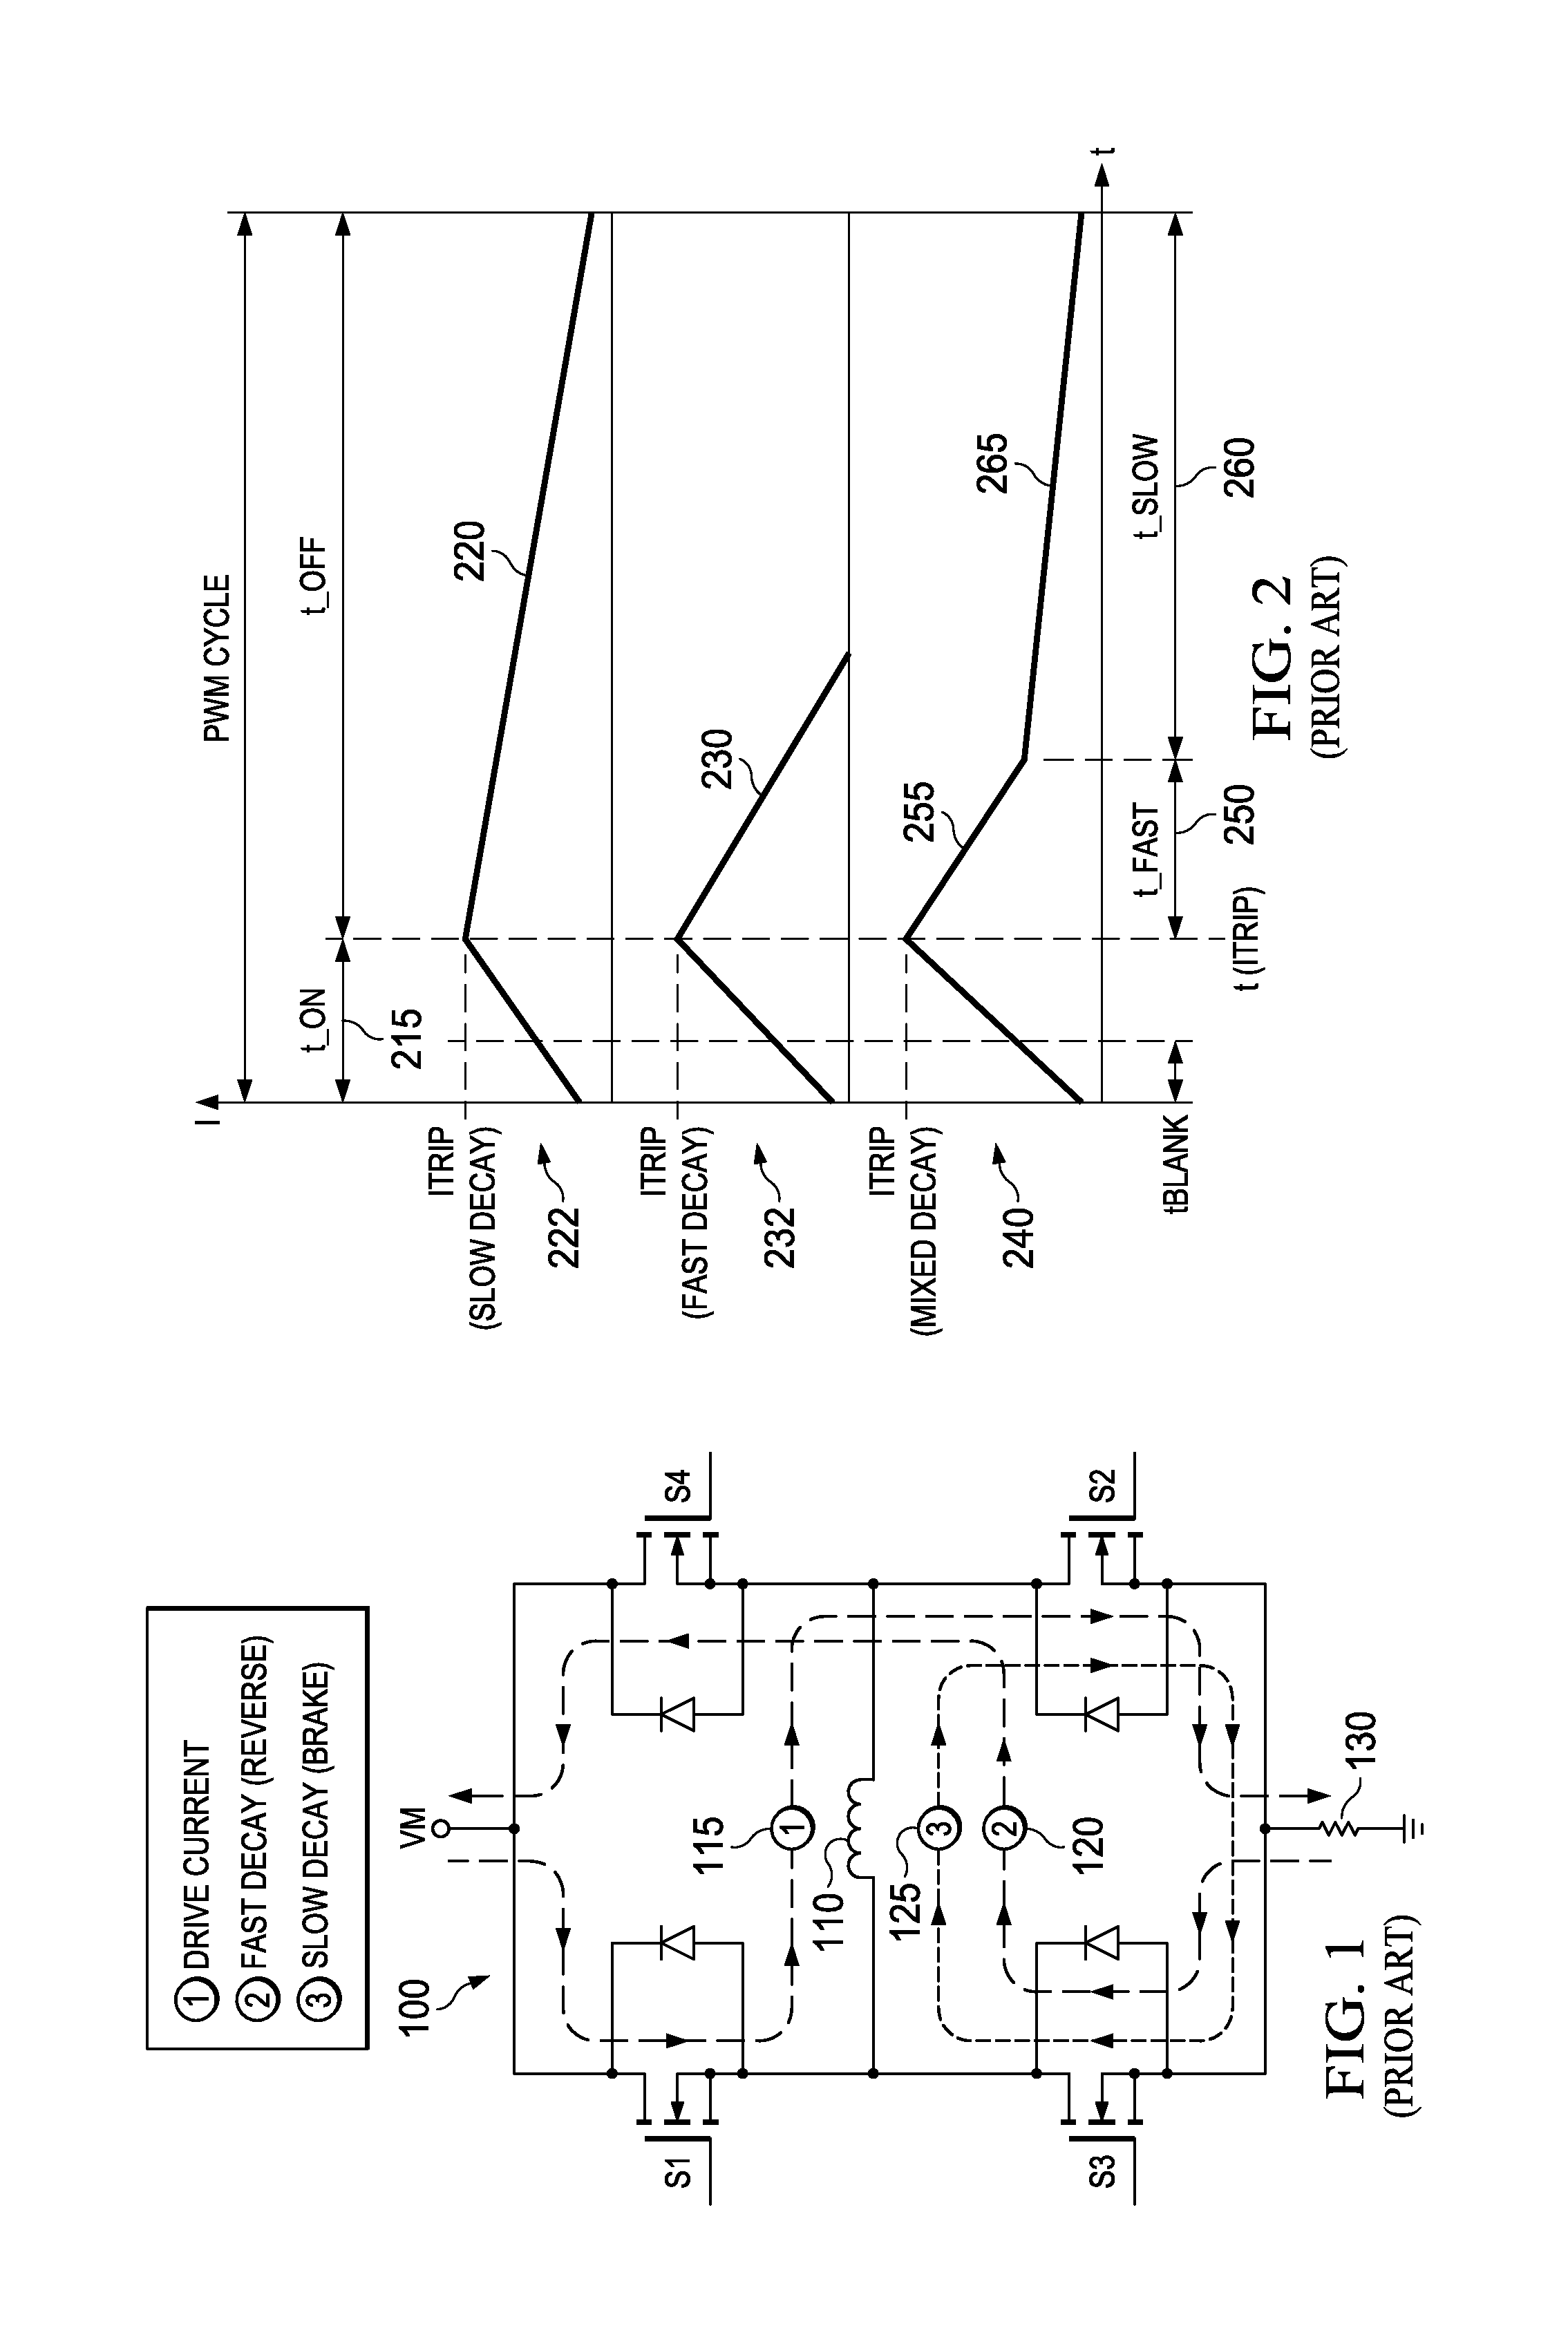 Dynamic mixed-mode current decay apparatus and methods